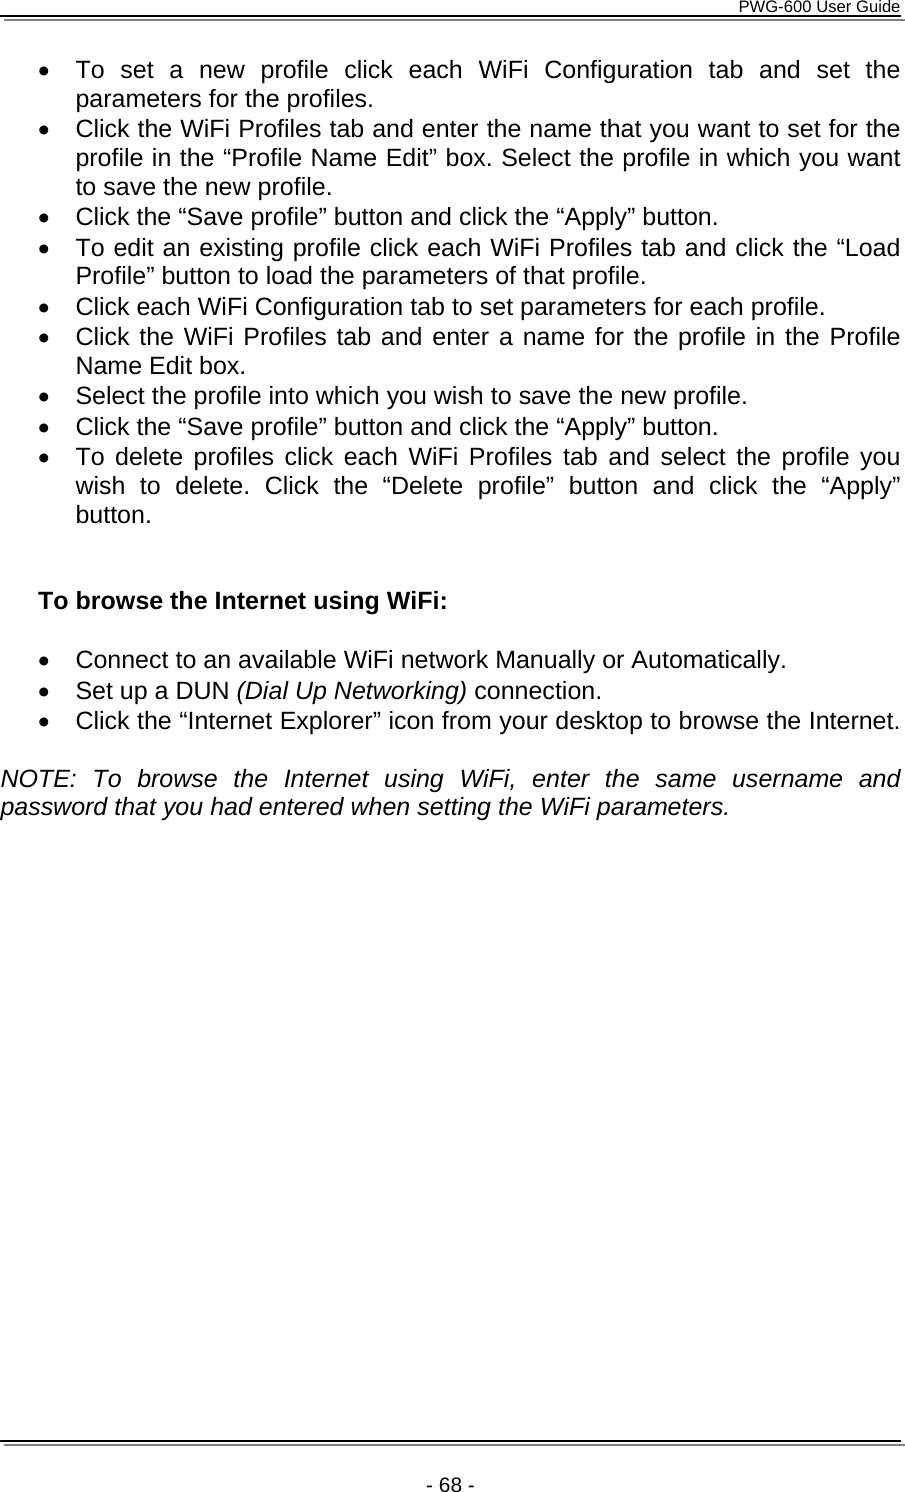      PWG-600 User Guide    - 68 - •  To set a new profile click each WiFi Configuration tab and set the parameters for the profiles. •  Click the WiFi Profiles tab and enter the name that you want to set for the profile in the “Profile Name Edit” box. Select the profile in which you want to save the new profile.  •  Click the “Save profile” button and click the “Apply” button. •  To edit an existing profile click each WiFi Profiles tab and click the “Load Profile” button to load the parameters of that profile.  •  Click each WiFi Configuration tab to set parameters for each profile.  •  Click the WiFi Profiles tab and enter a name for the profile in the Profile Name Edit box. •  Select the profile into which you wish to save the new profile.  •  Click the “Save profile” button and click the “Apply” button. •  To delete profiles click each WiFi Profiles tab and select the profile you wish to delete. Click the “Delete profile” button and click the “Apply” button.   To browse the Internet using WiFi:  •  Connect to an available WiFi network Manually or Automatically.  •  Set up a DUN (Dial Up Networking) connection. •  Click the “Internet Explorer” icon from your desktop to browse the Internet.     NOTE: To browse the Internet using WiFi, enter the same username and password that you had entered when setting the WiFi parameters.  